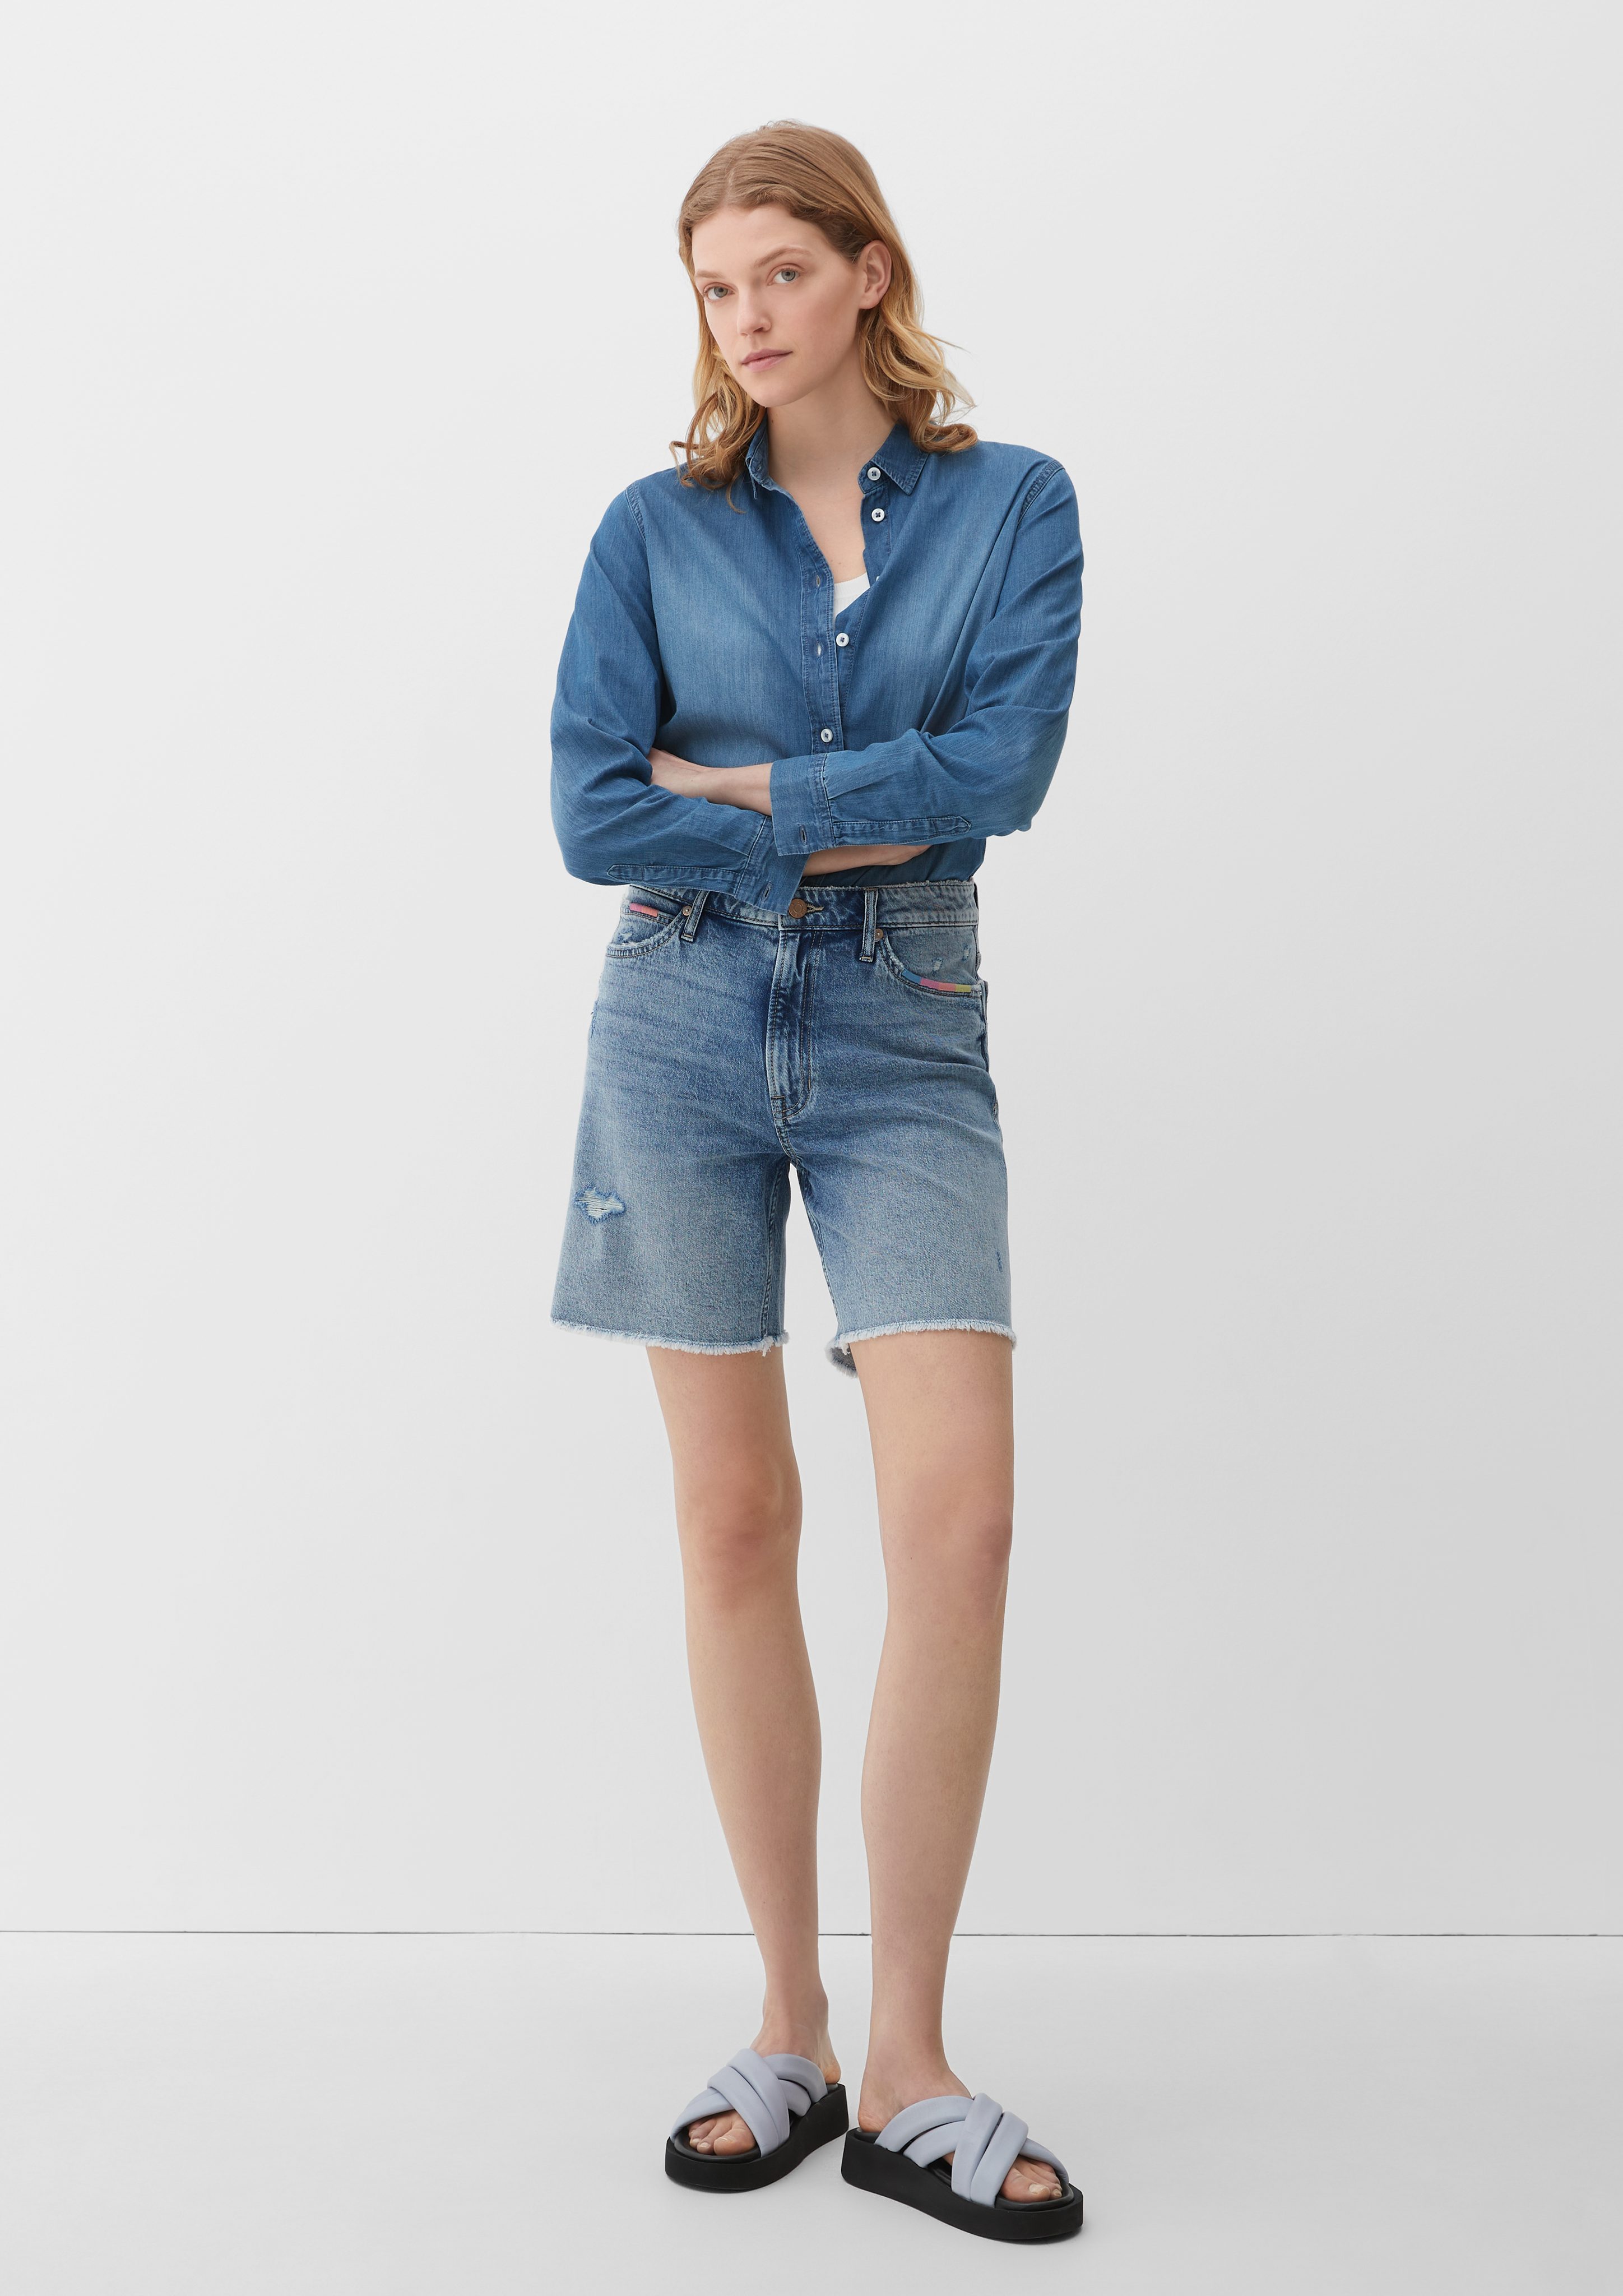 Jeans-Shorts Destroyes, / Relaxed Jeansshorts Rise / / s.Oliver Leg Straight Waschung, Fit Kontrast-Details Mid